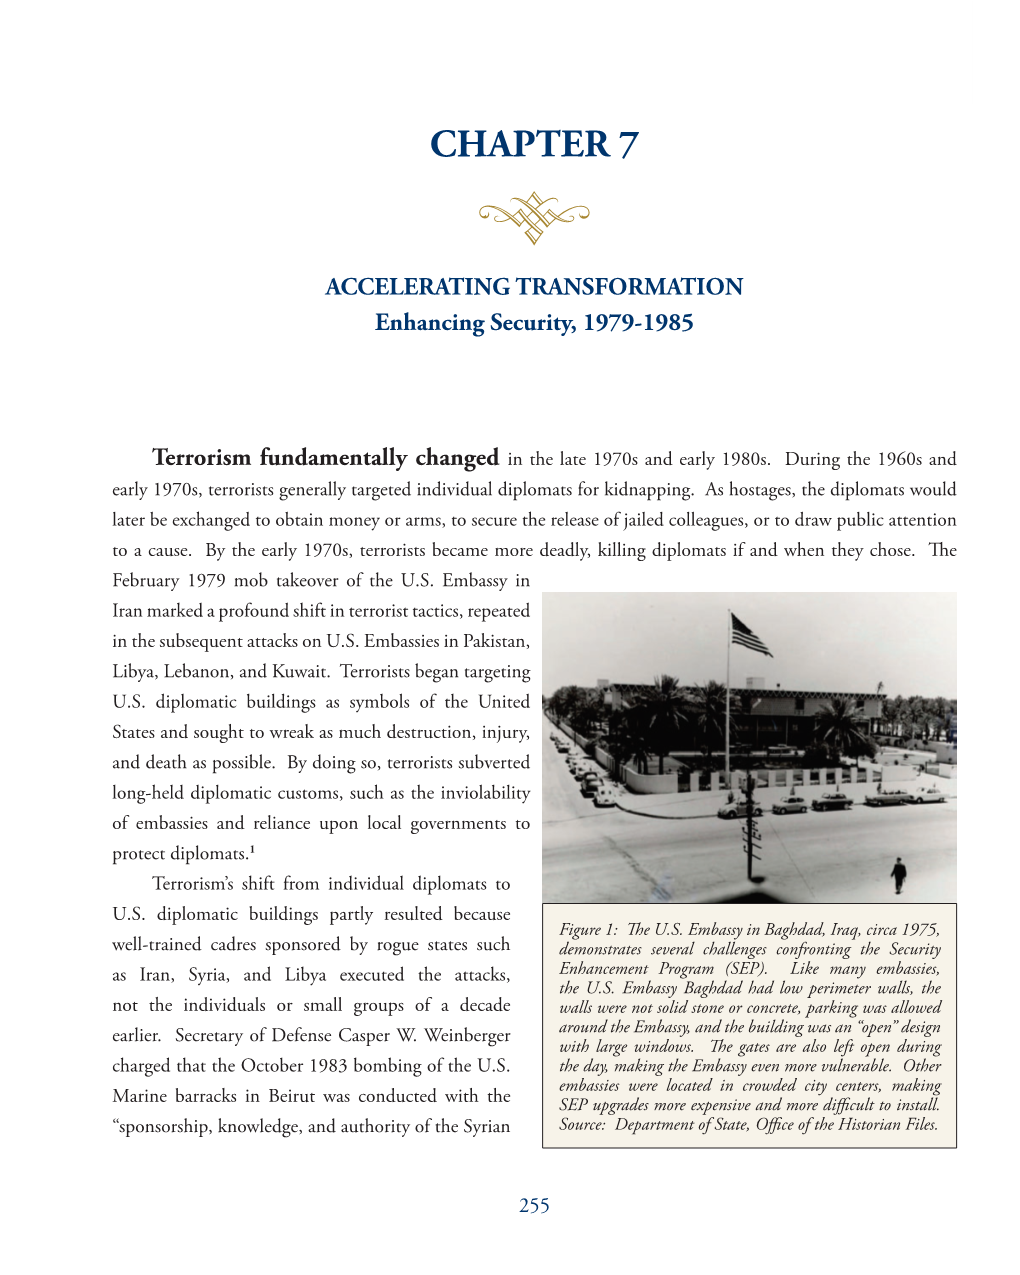 CHAPTER 7 ACCELERATING TRANSFORMATION: Enhancing Security, 1979-1985